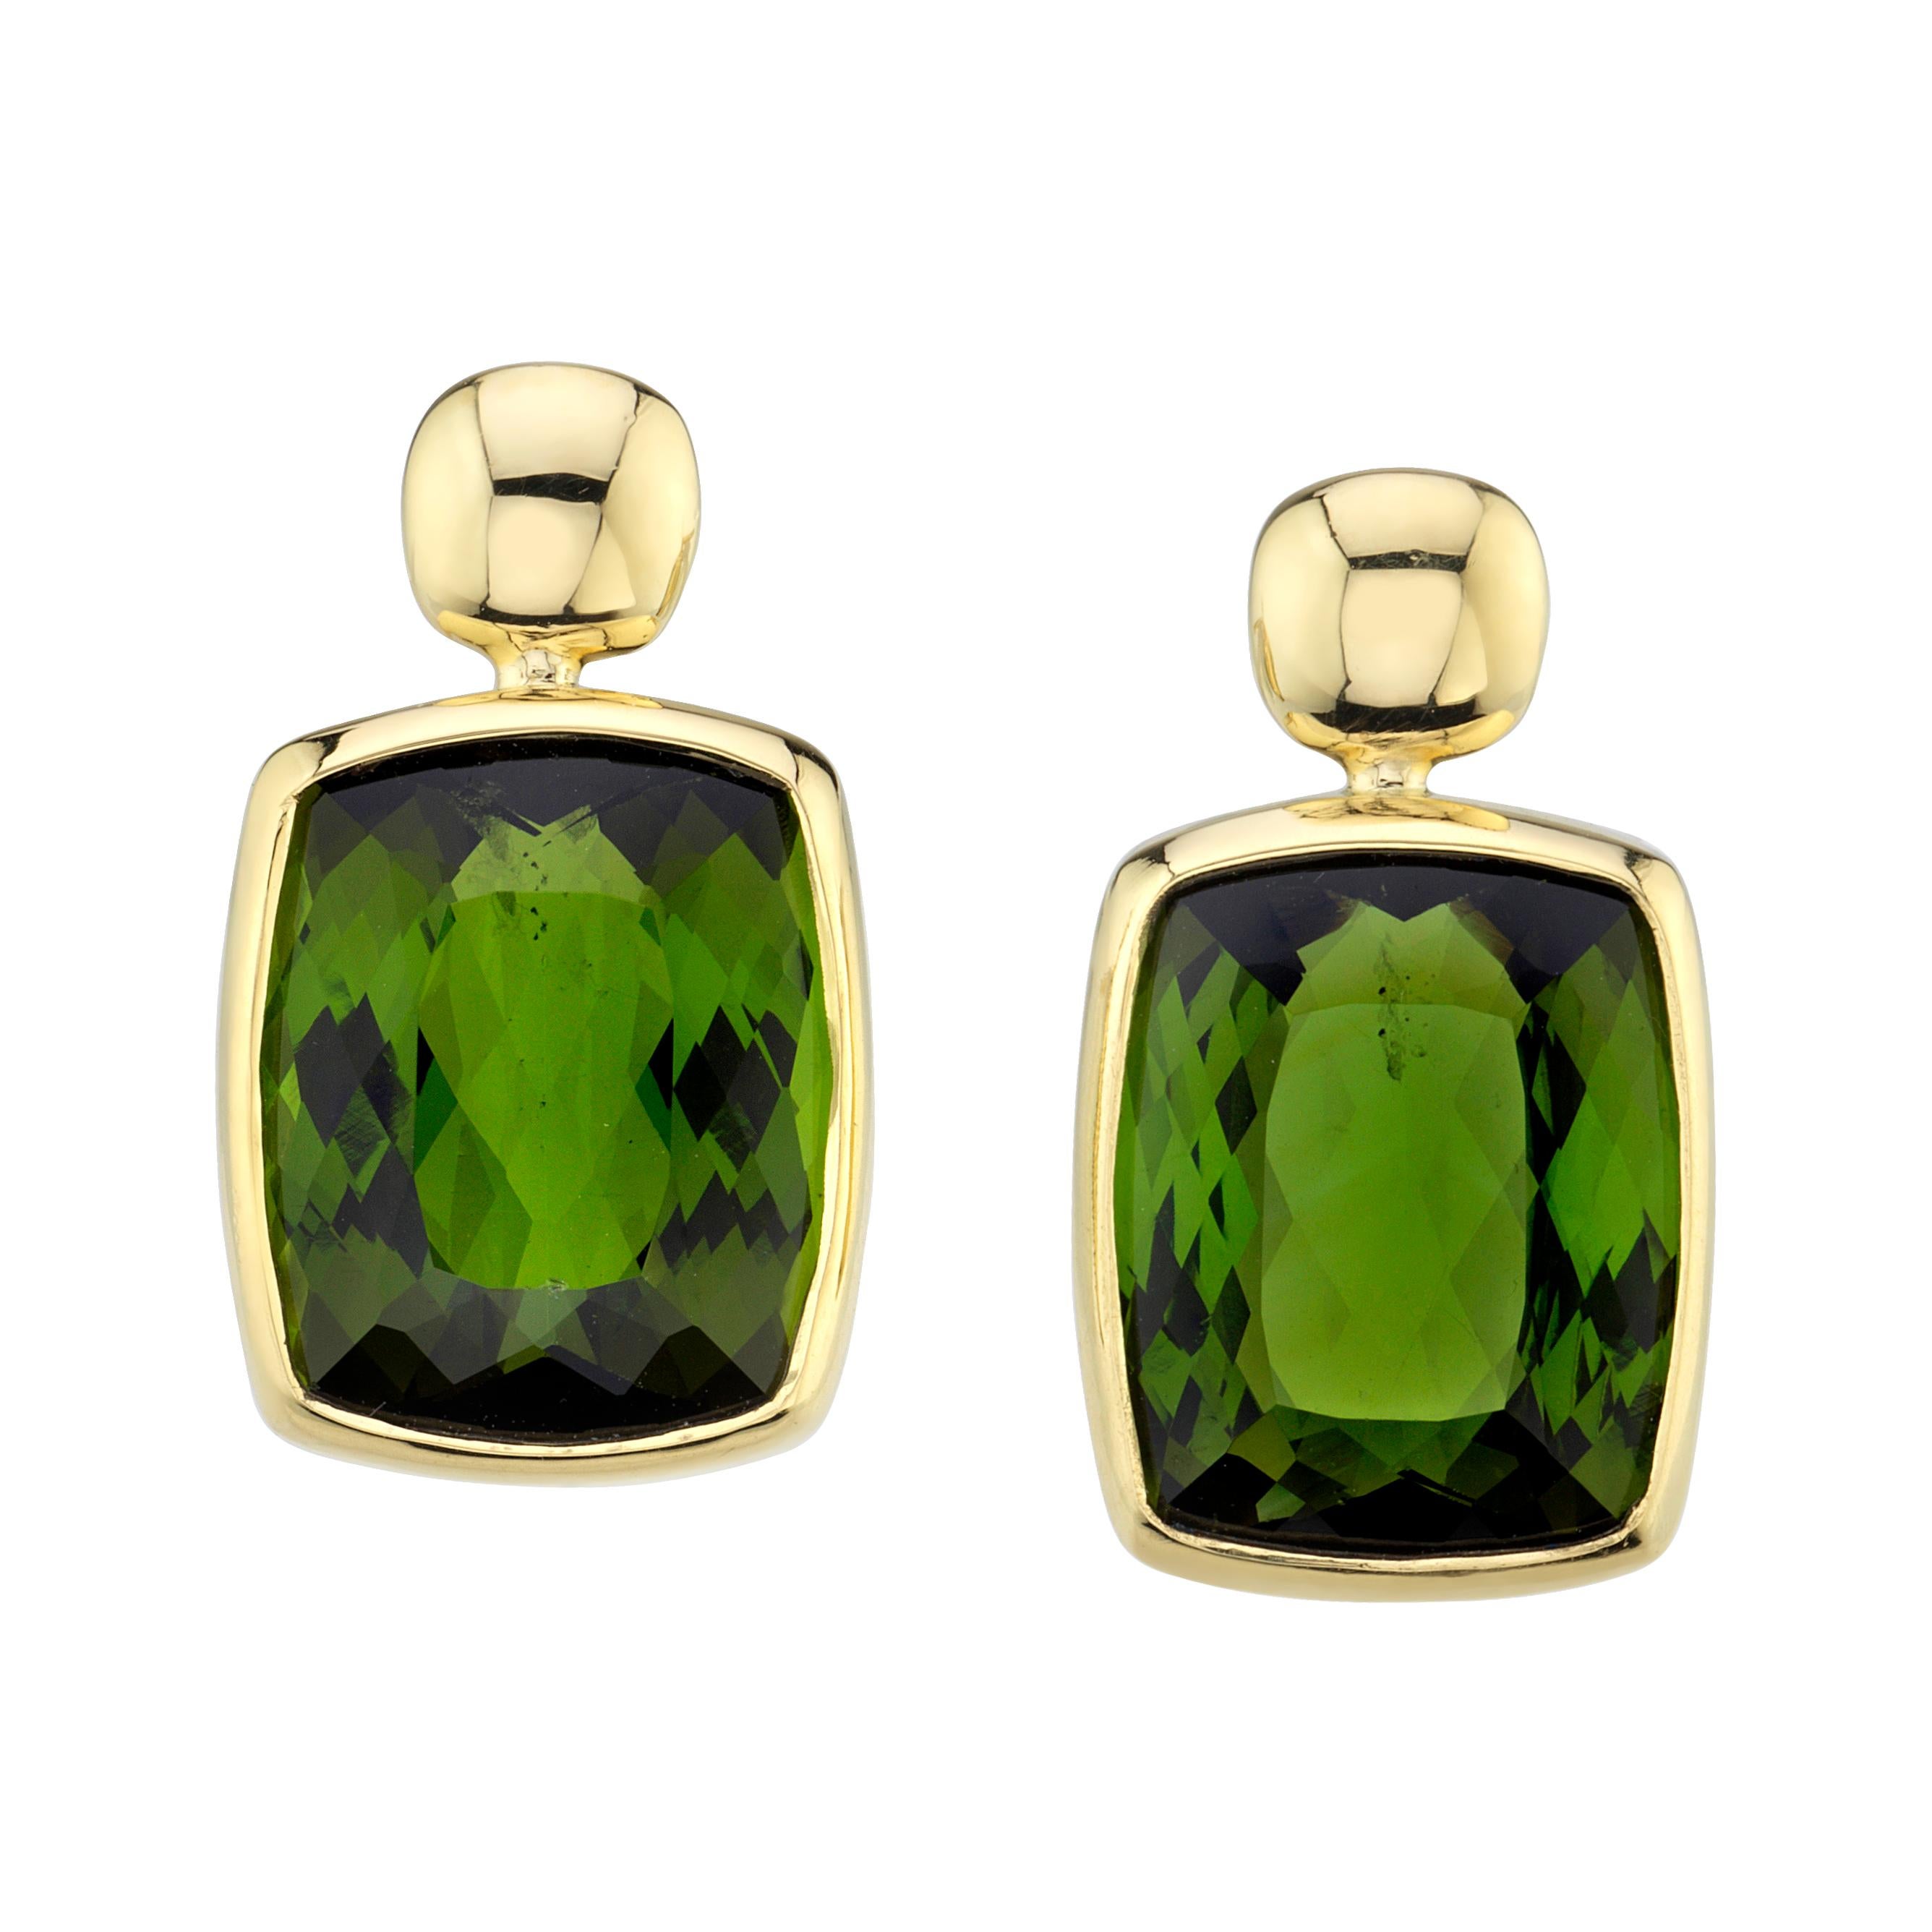 These rich green, cushion-cut tourmaline earrings will add an eye-catching pop of sophisticated color to any outfit! Set in custom-made 18k yellow gold bezels that hang just below shiny gold  posts, these gems are beautifully matched, giving off